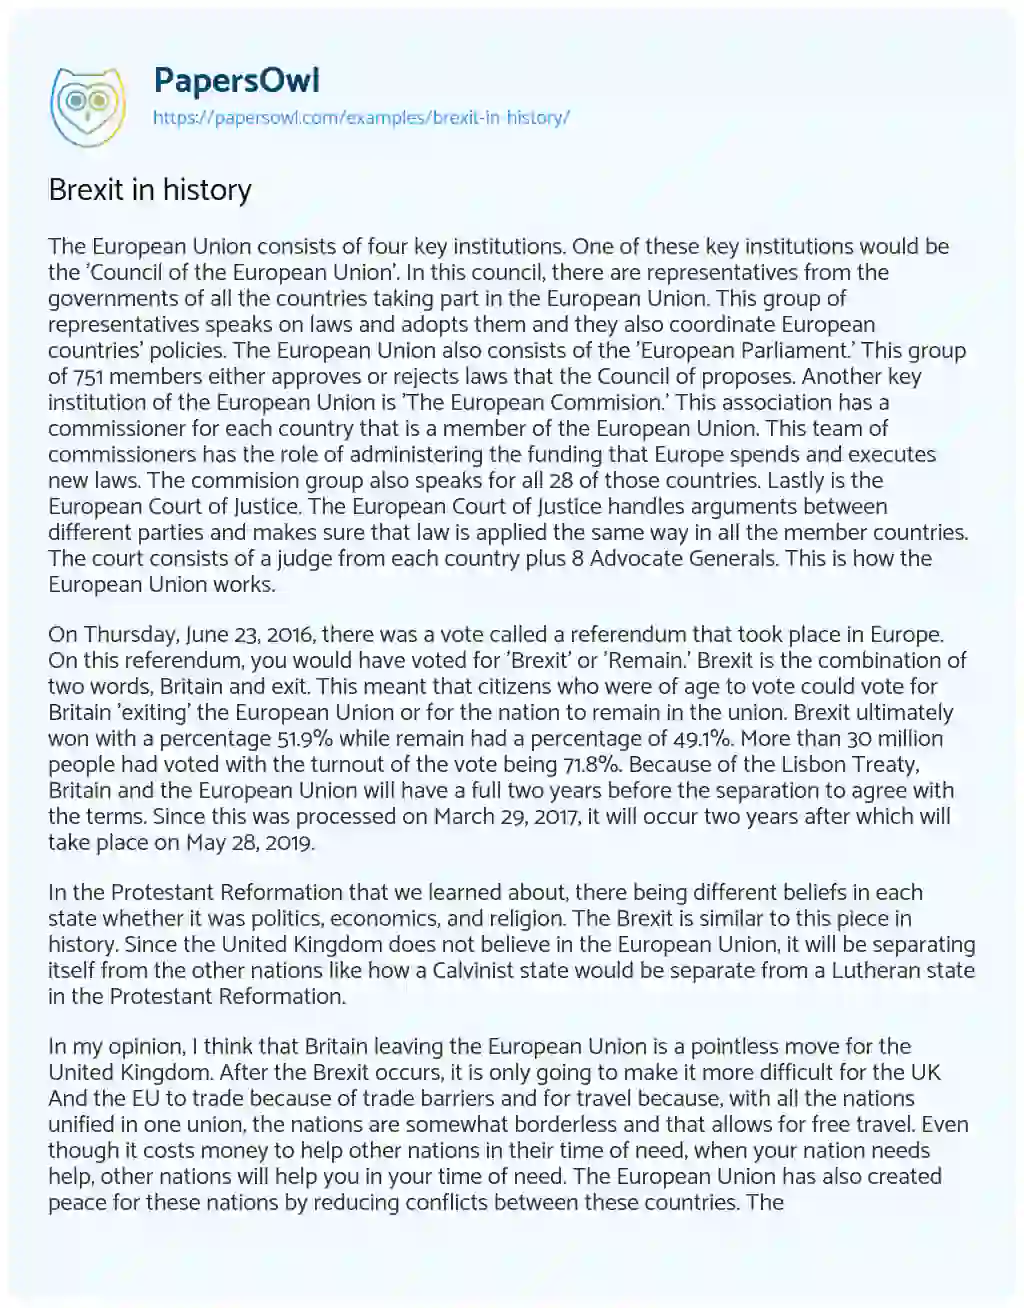 Brexit in History essay